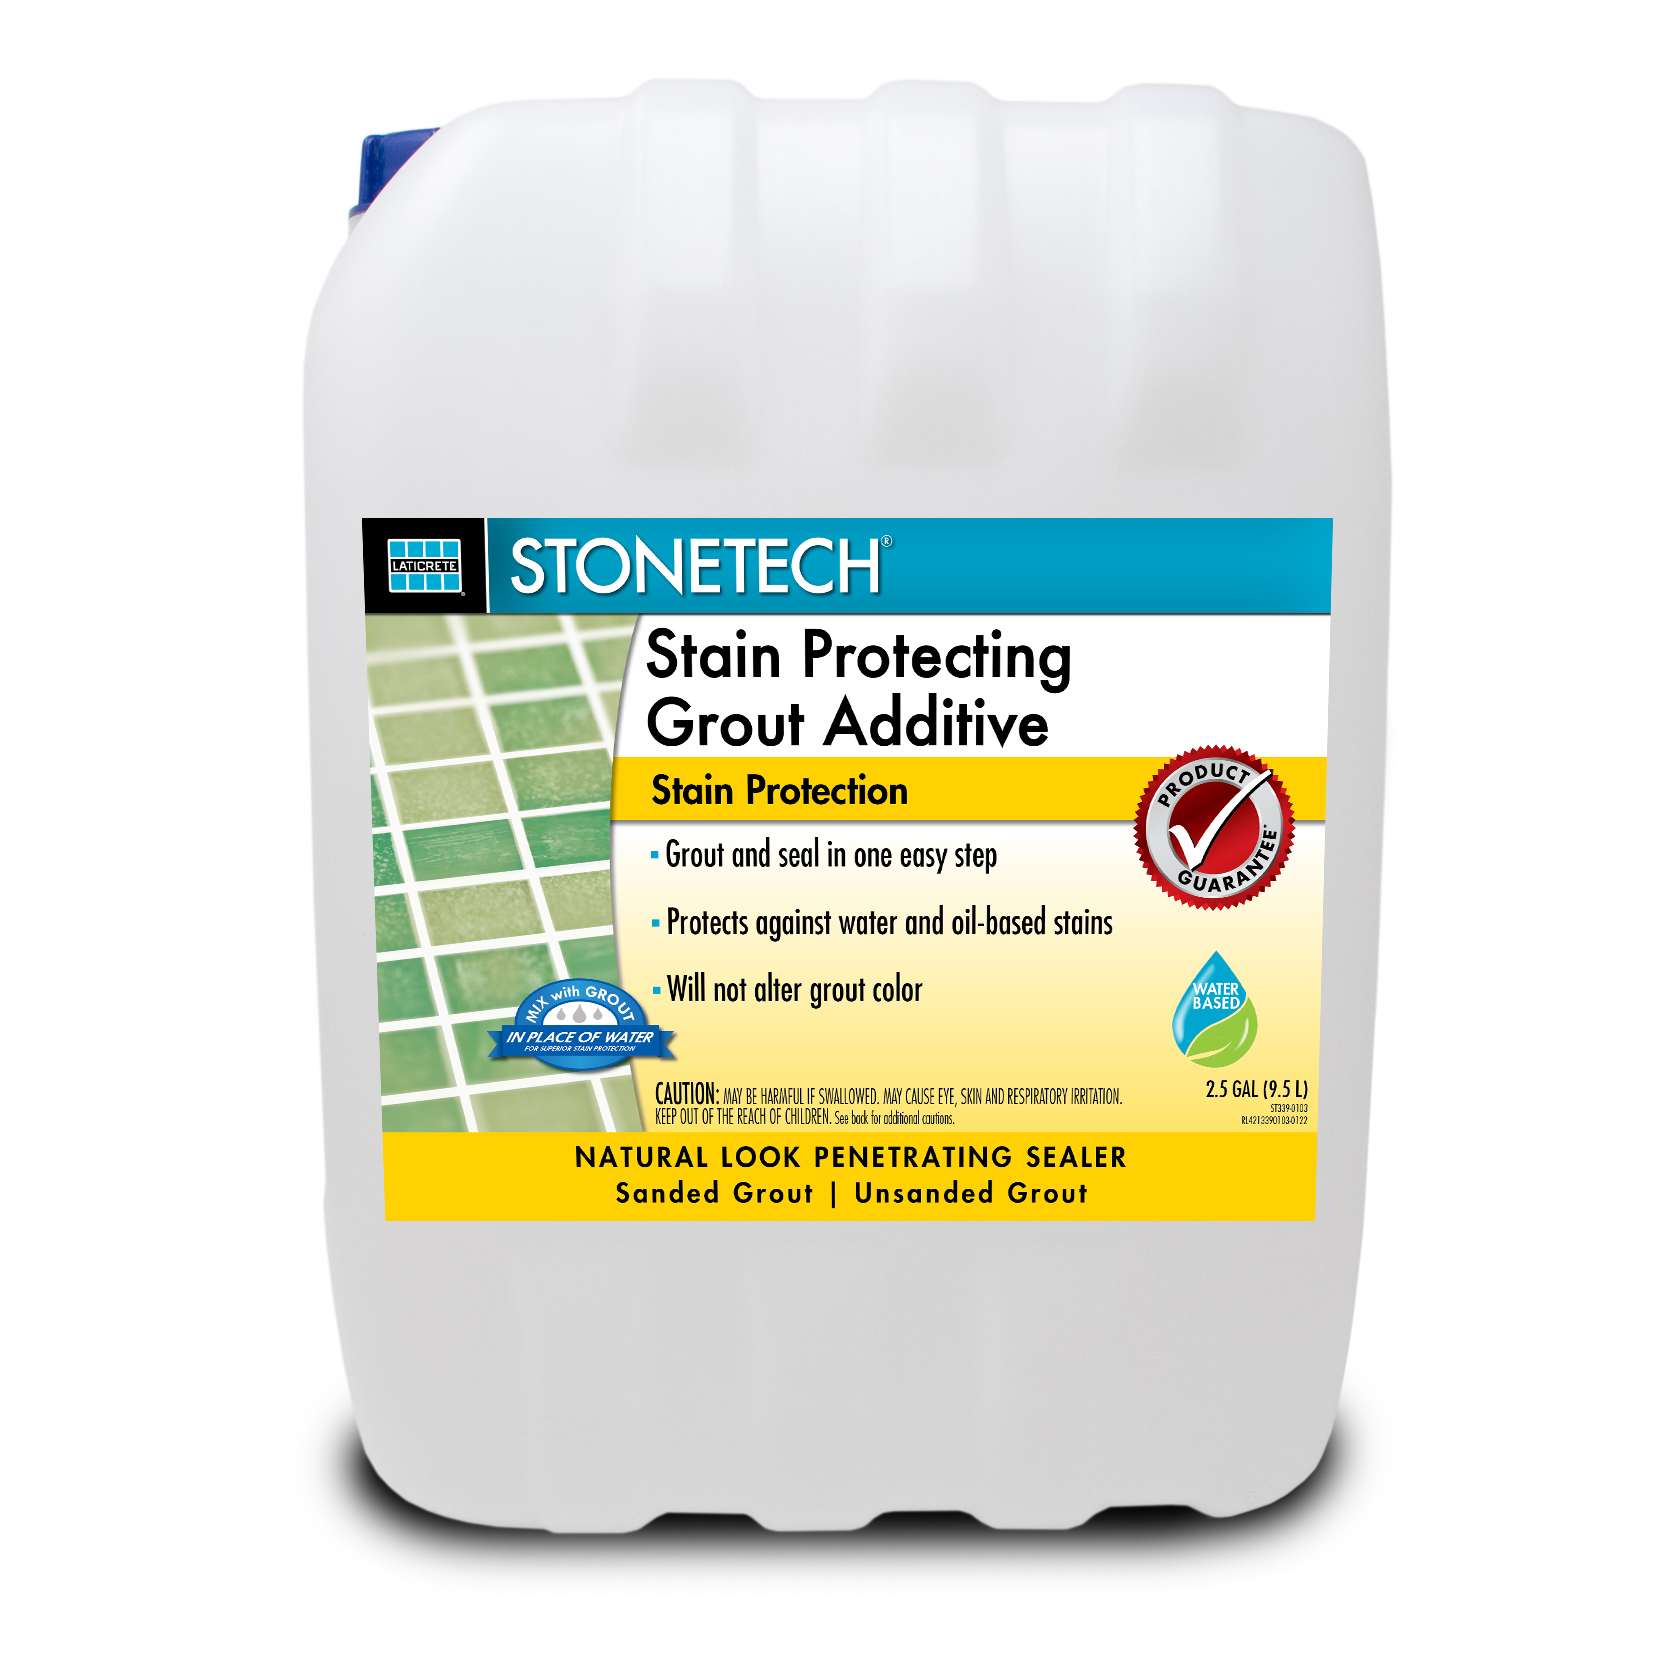 STONETECH® Stain Protecting Grout Additive